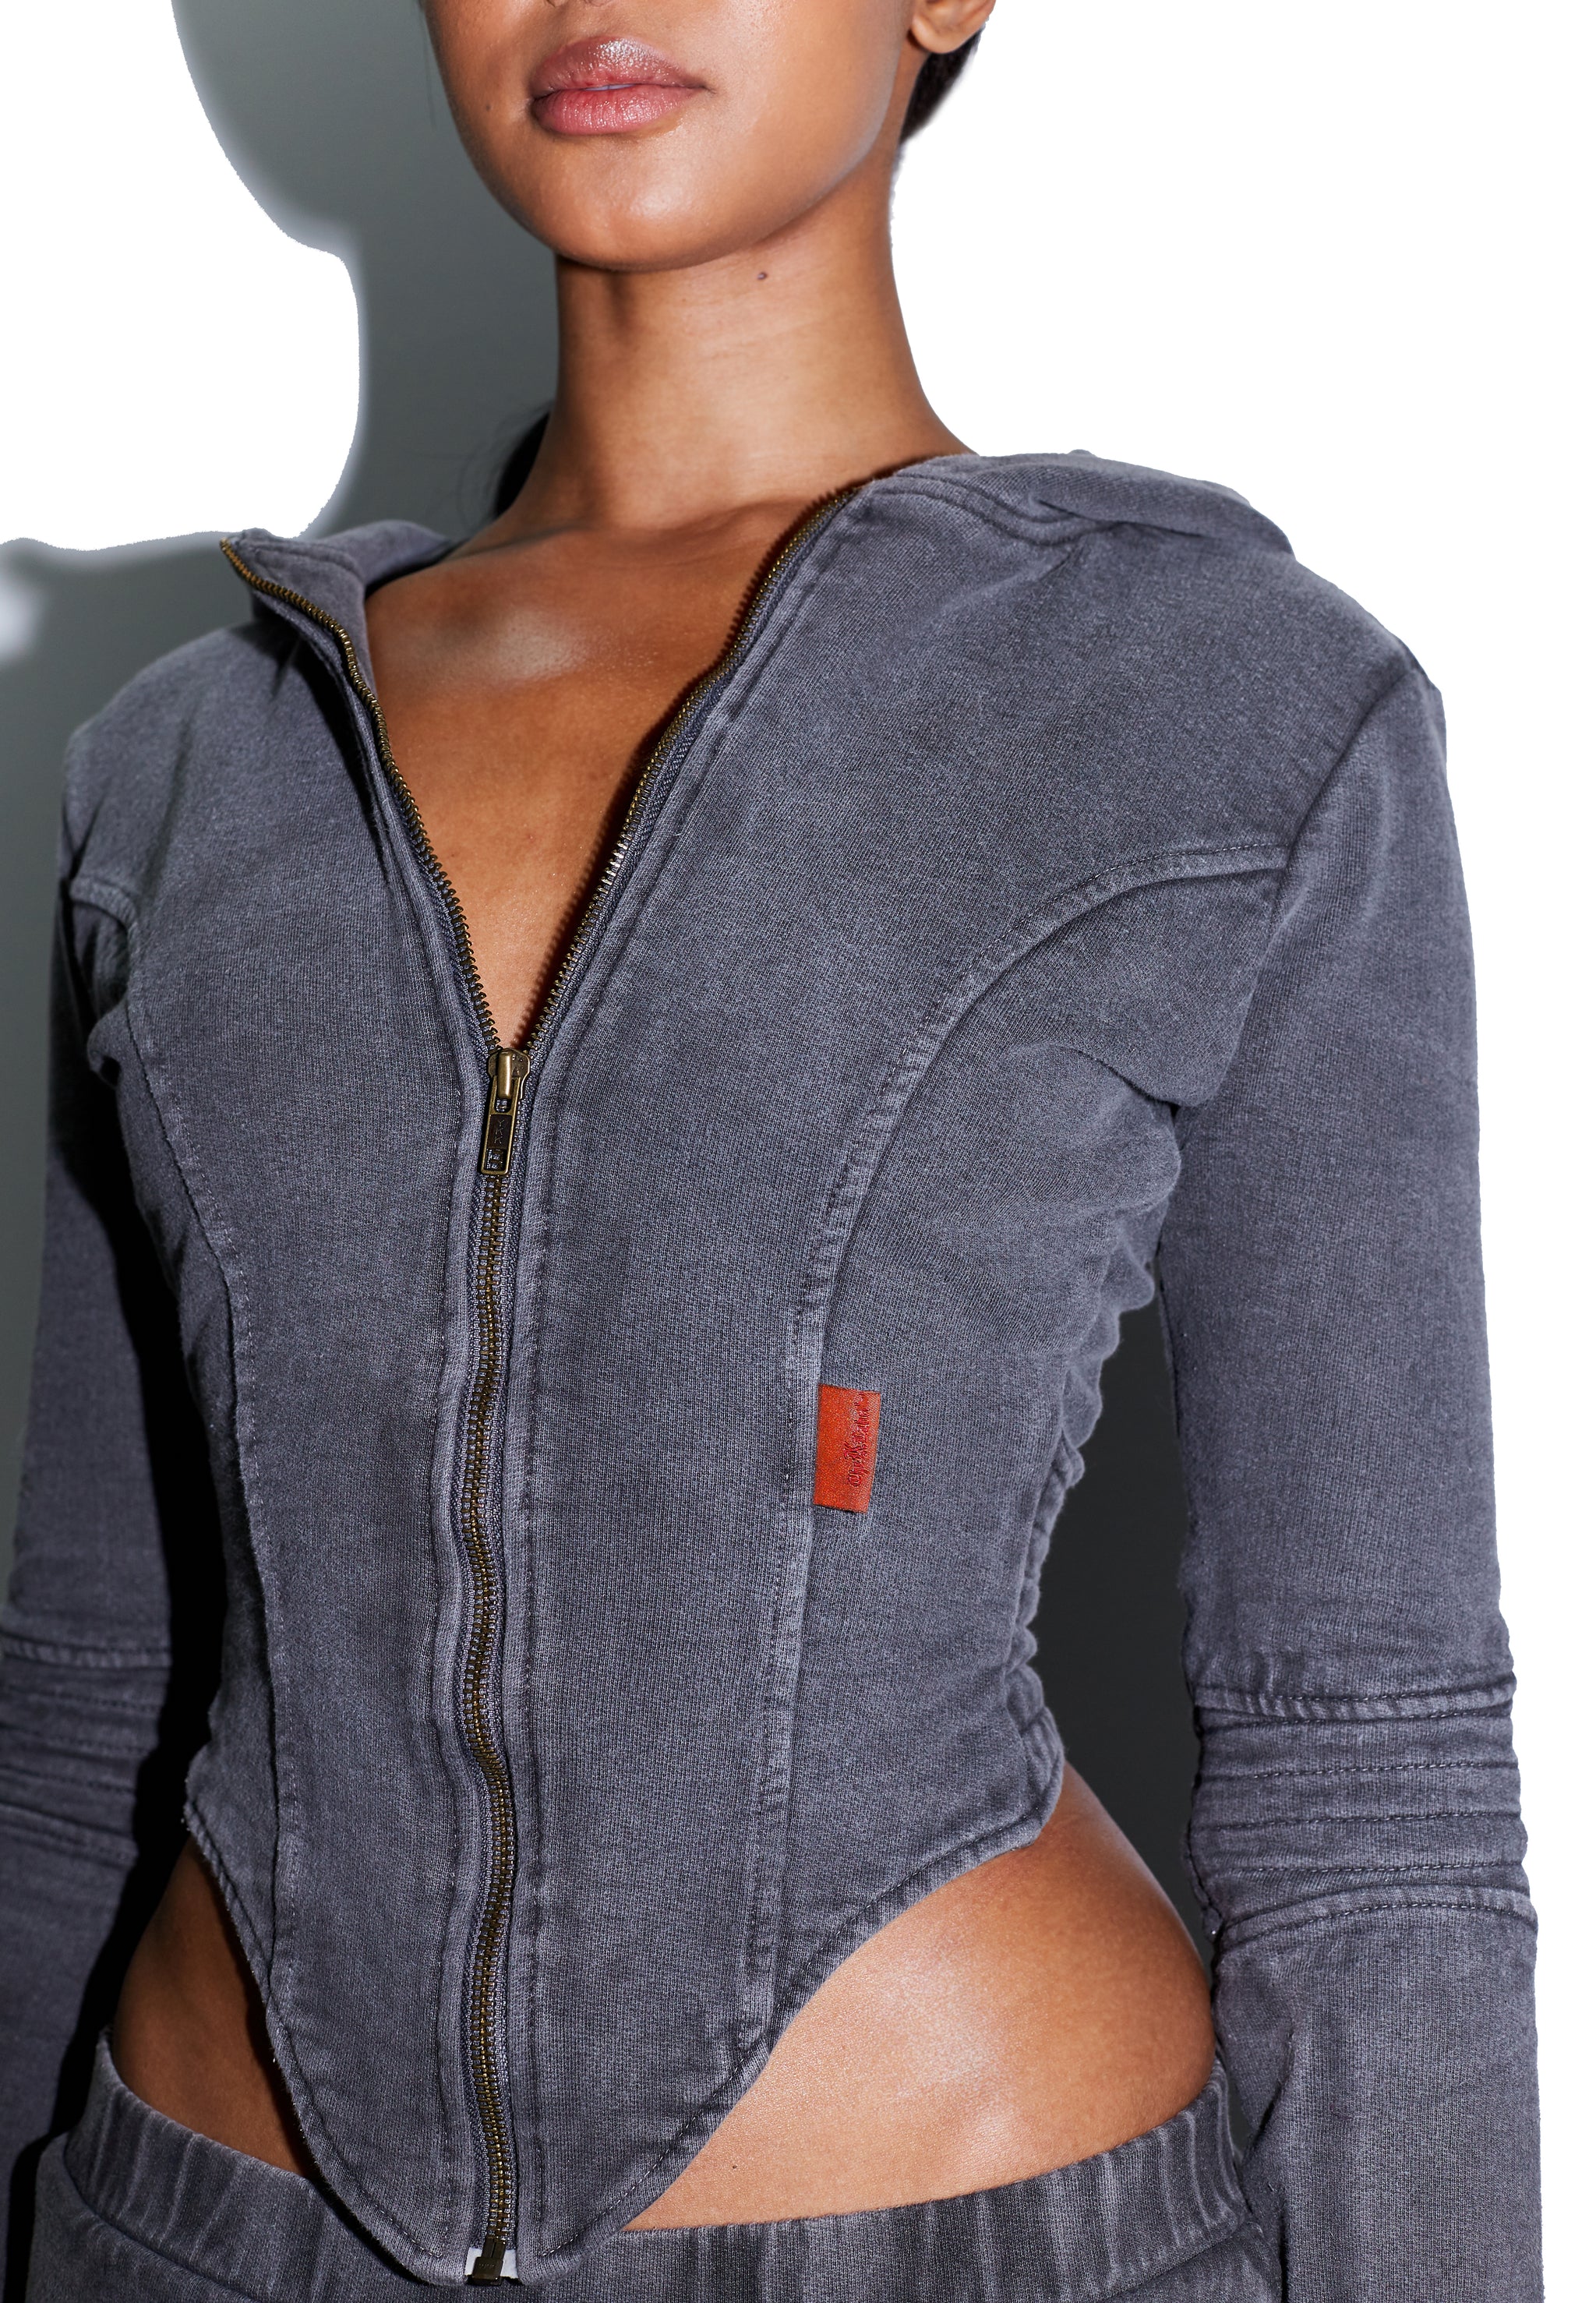 Corset Hoodie  in Granite by The K Label, Fashion, Sweatpants, Cosy, Designer